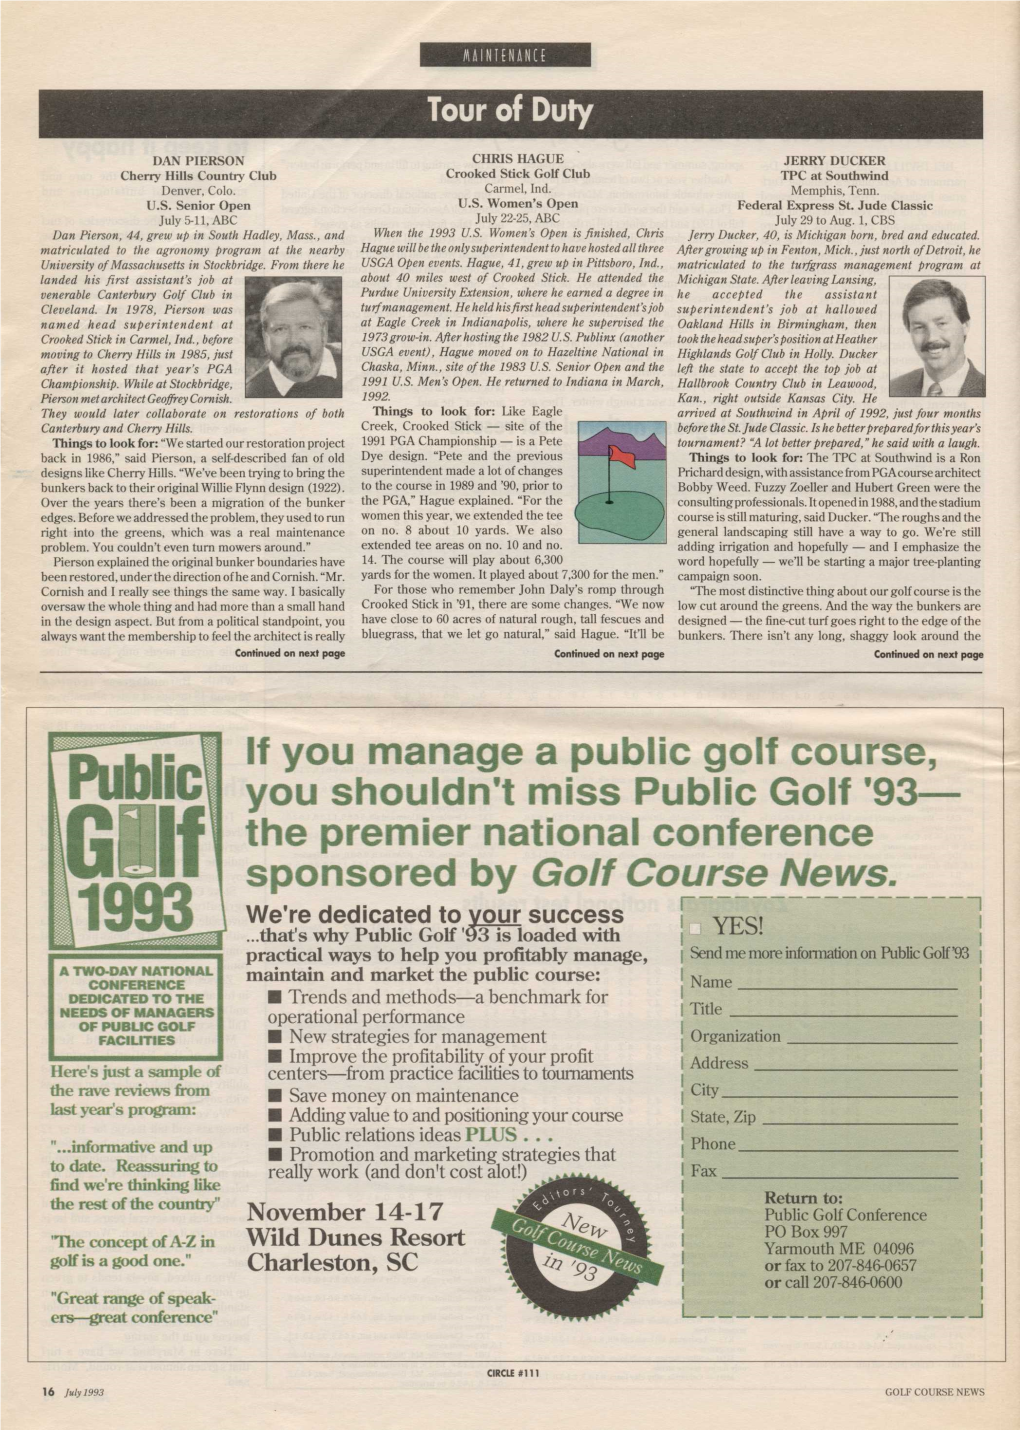 93- the Premier National Conference Sponsored by Golf Course News